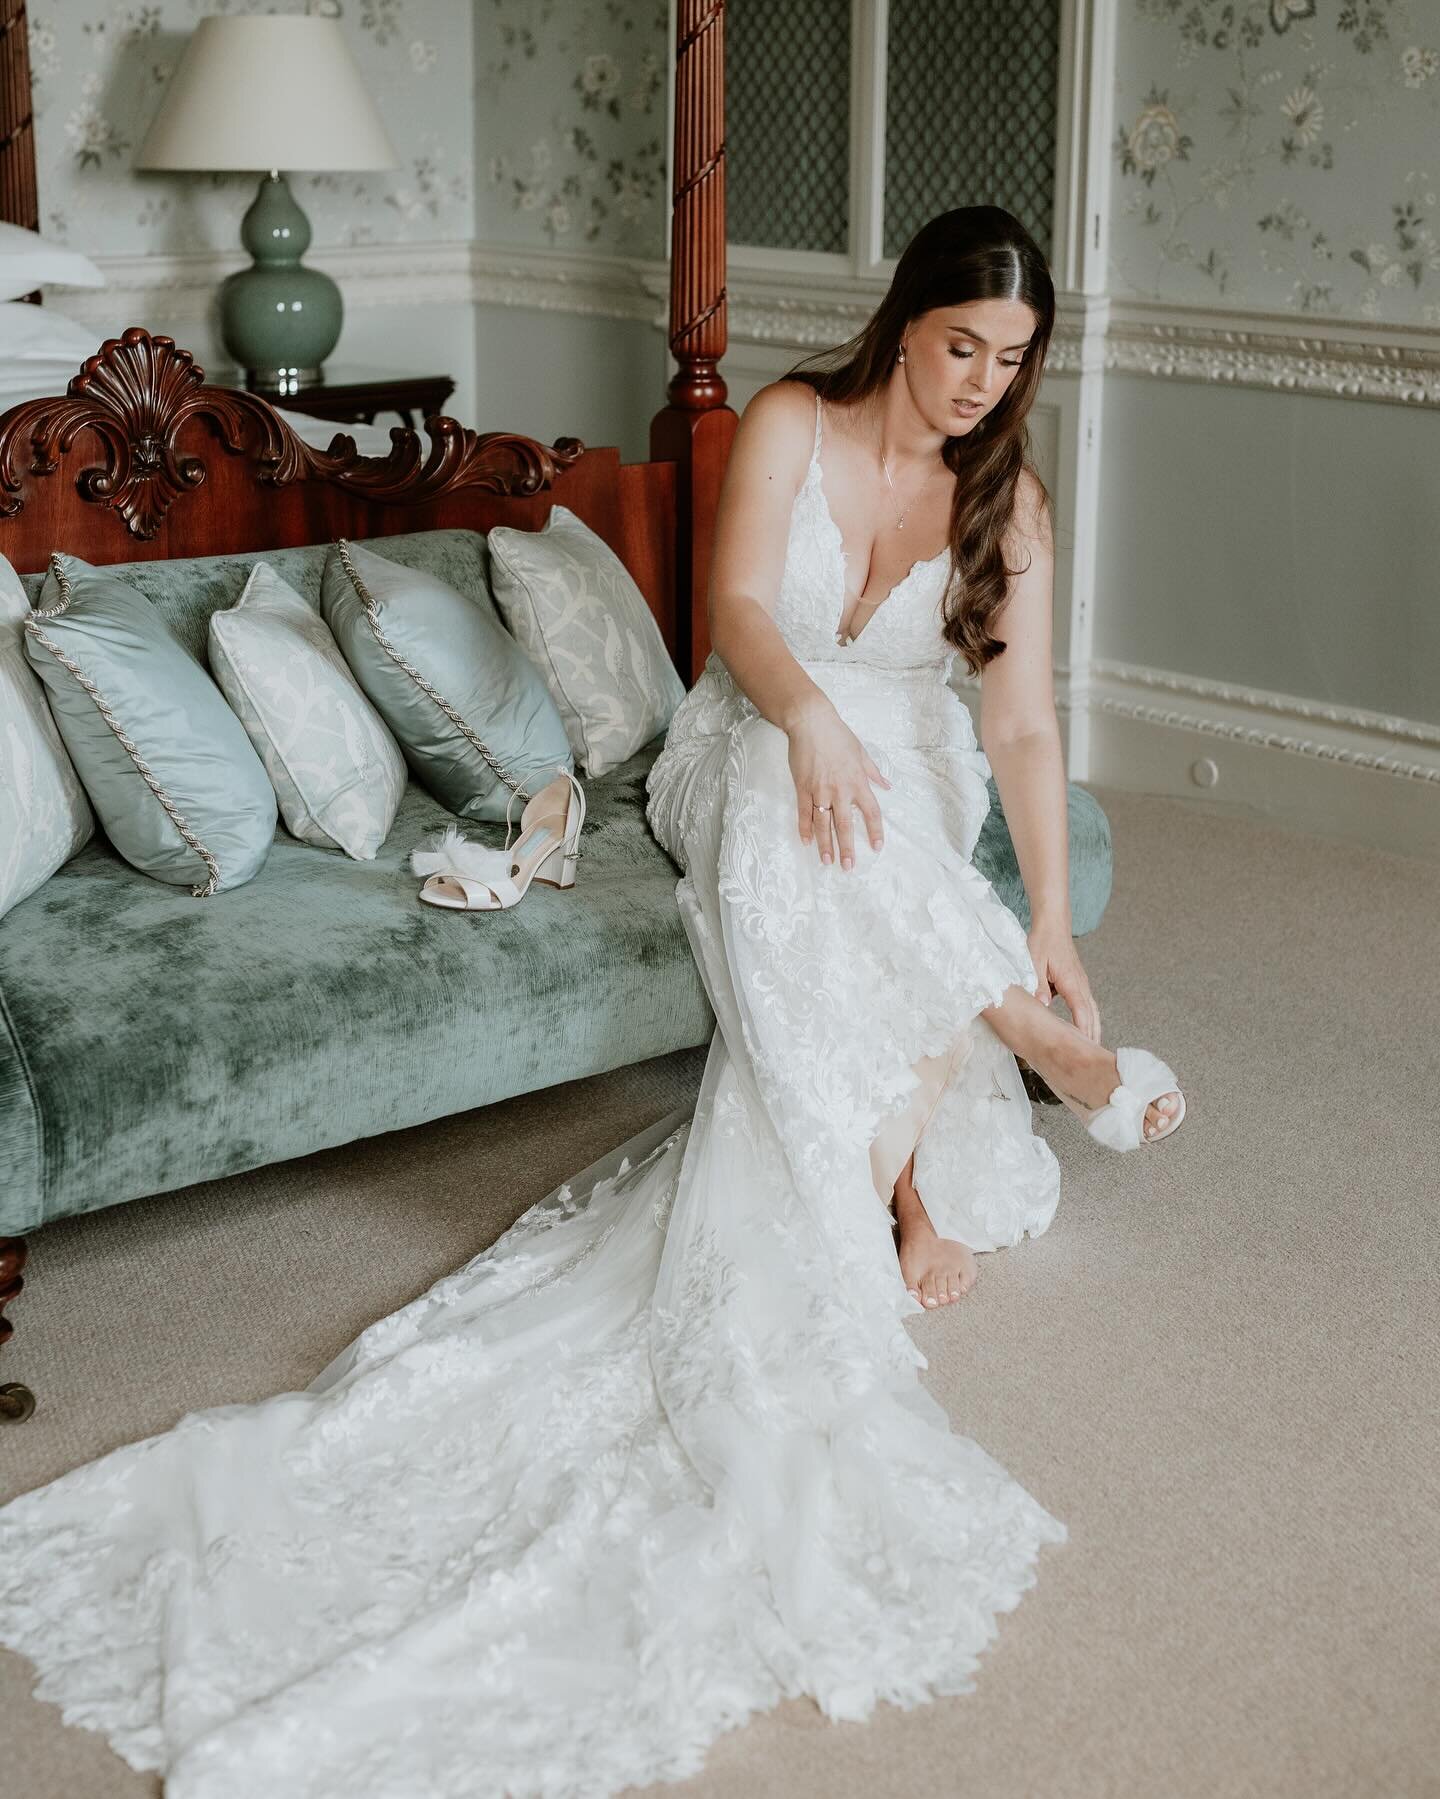 We&rsquo;re back on the feed today with some of Rachael&rsquo;s stunning prep moments, for an update and a quick hello to all the new faces around here! 

I can&rsquo;t wait to get back to the regularly scheduled wedding content after a couple of wee